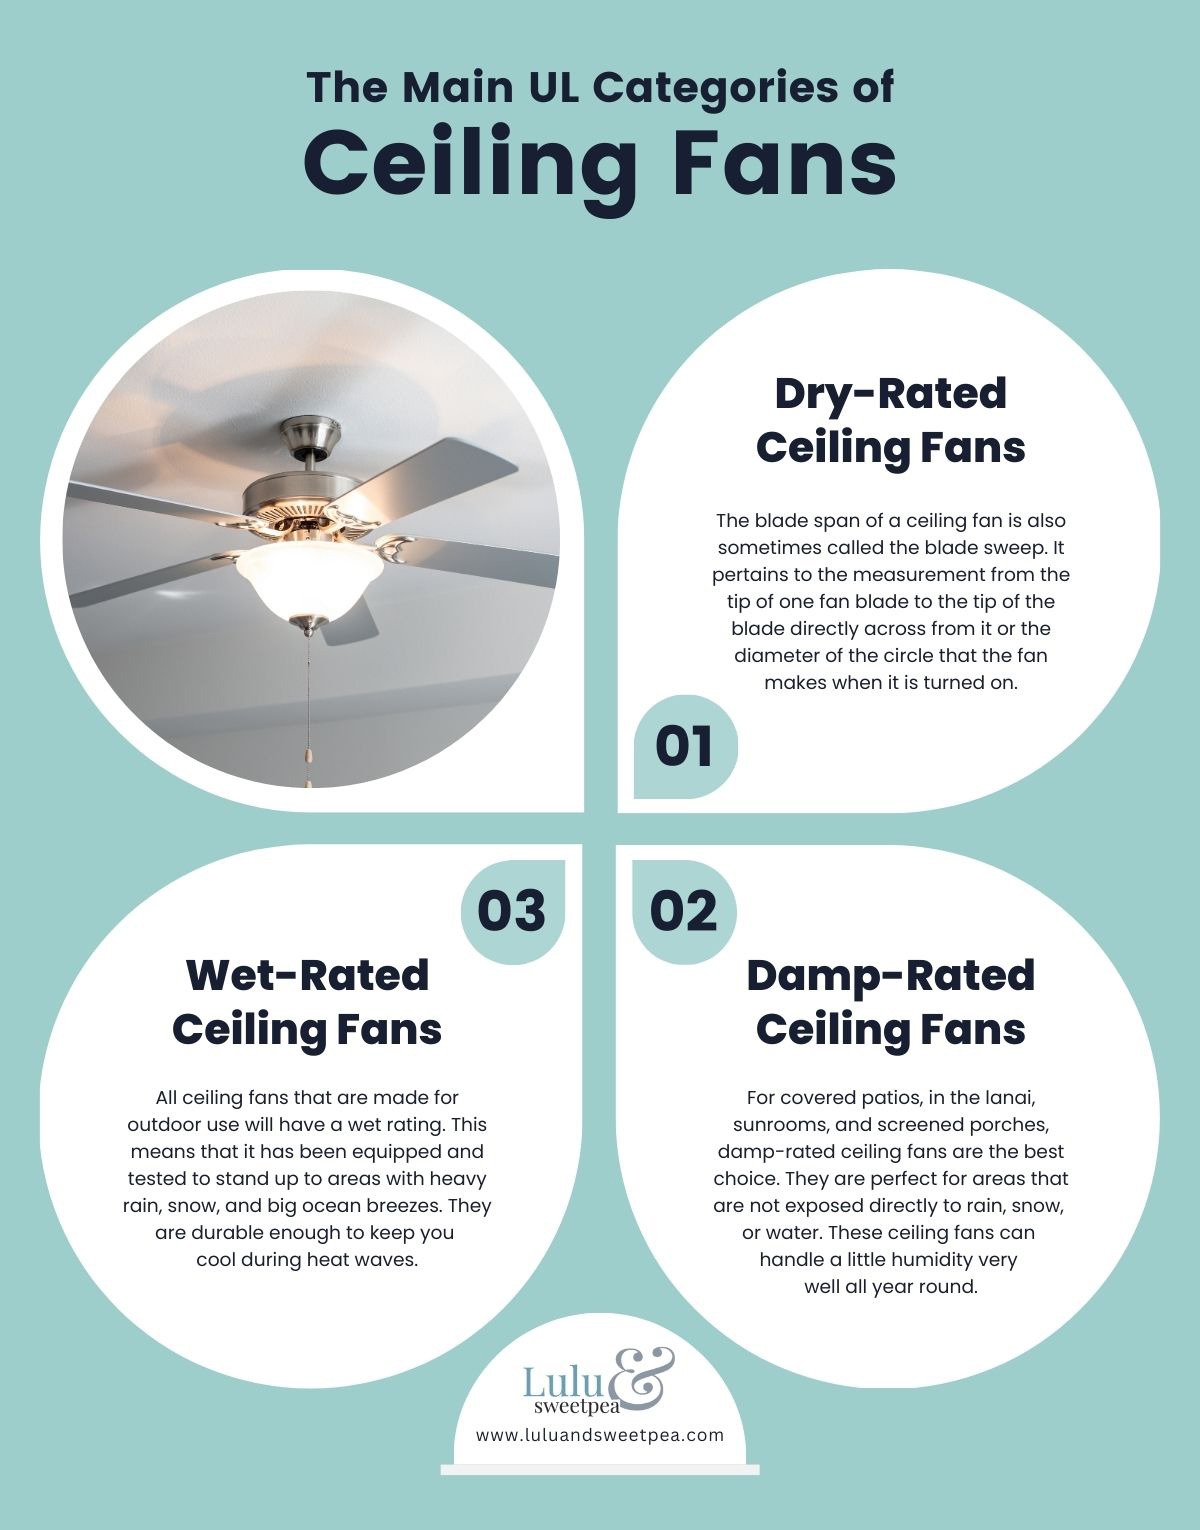 The Main UL Categories of Ceiling Fans